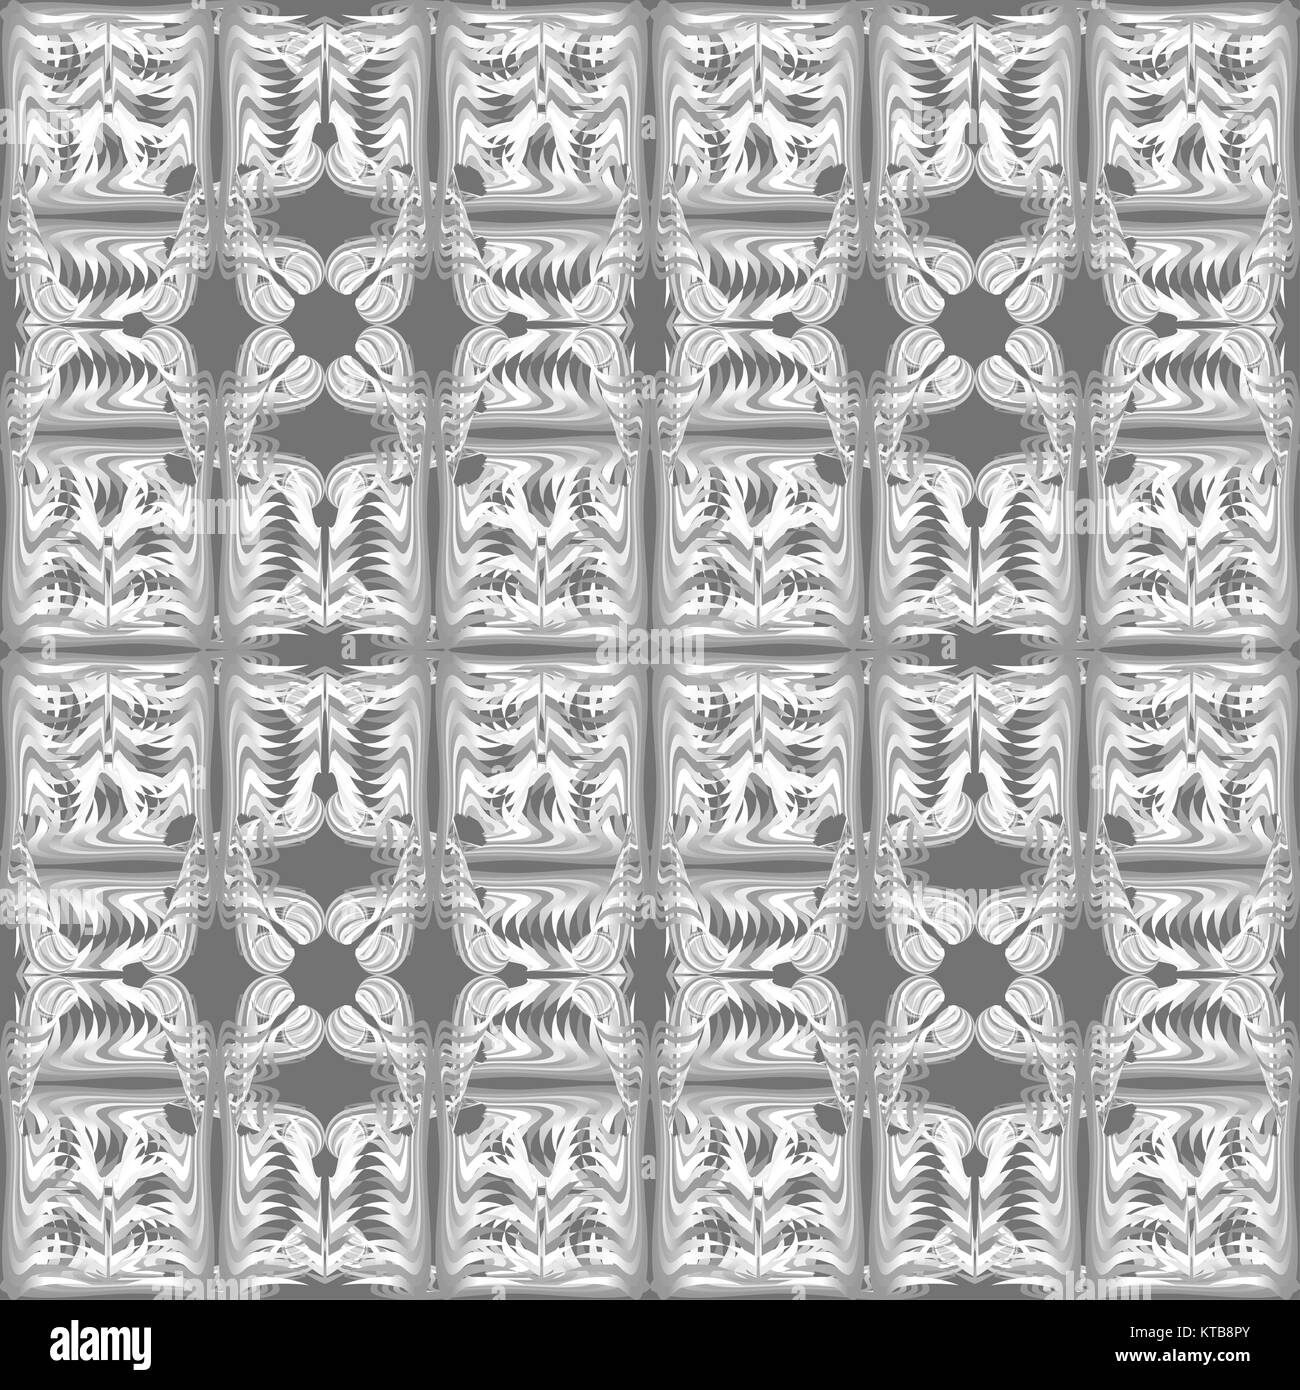 Gray and black pattern seamless on white background Stock Photo